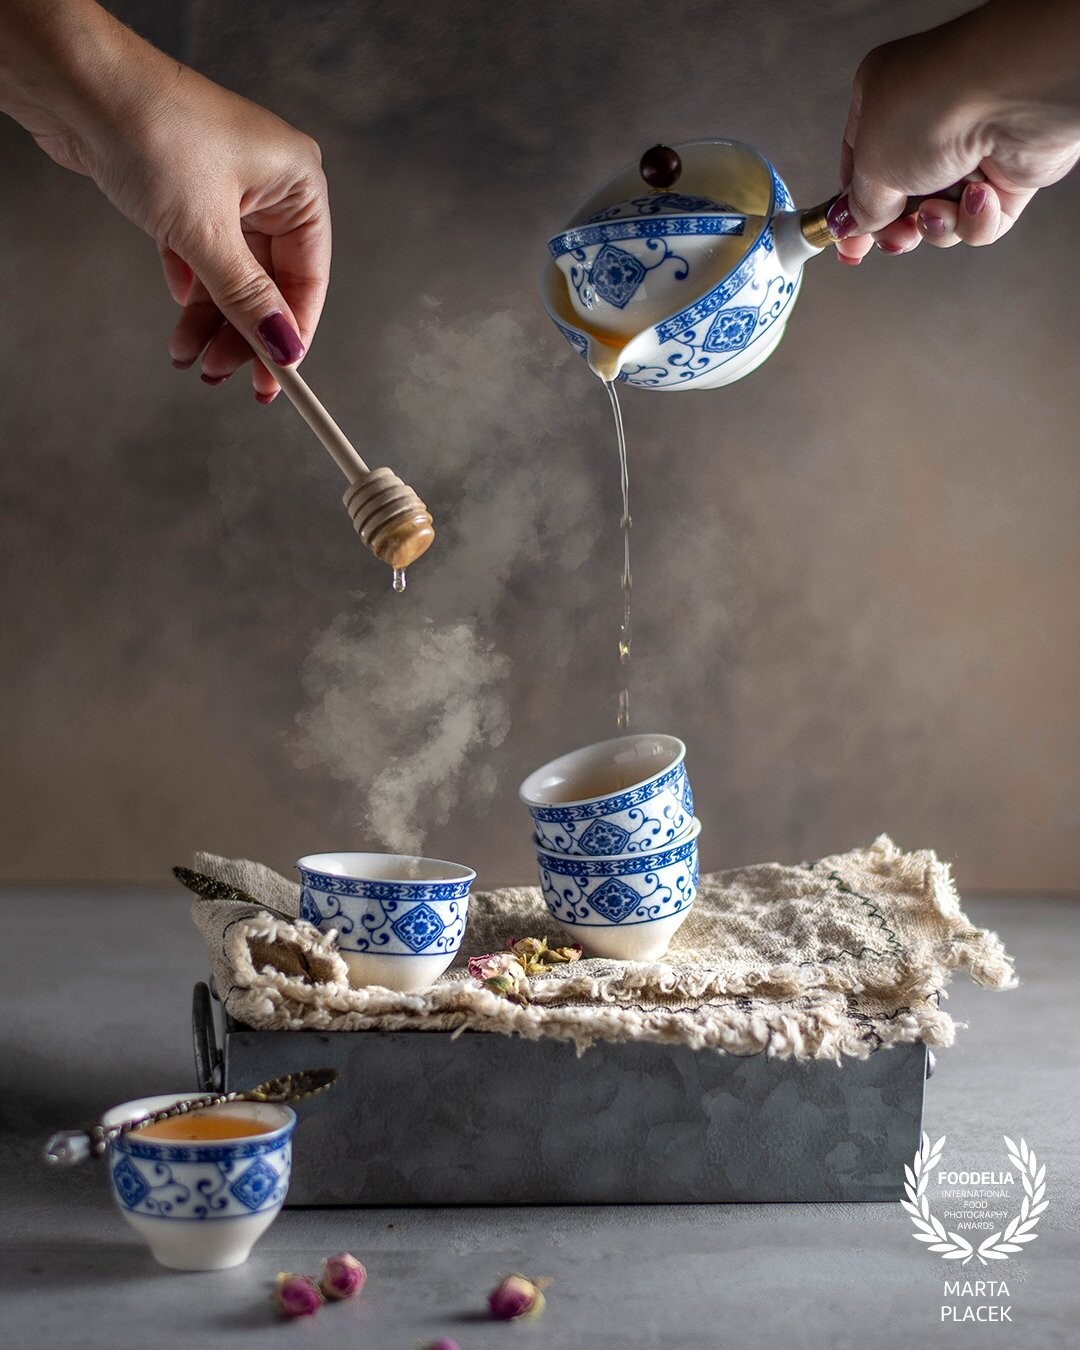 I am an absolute fan of tea and the whole process of its preparation. Nothing's better than a tea in a cold winter evening. Would you agree with me?